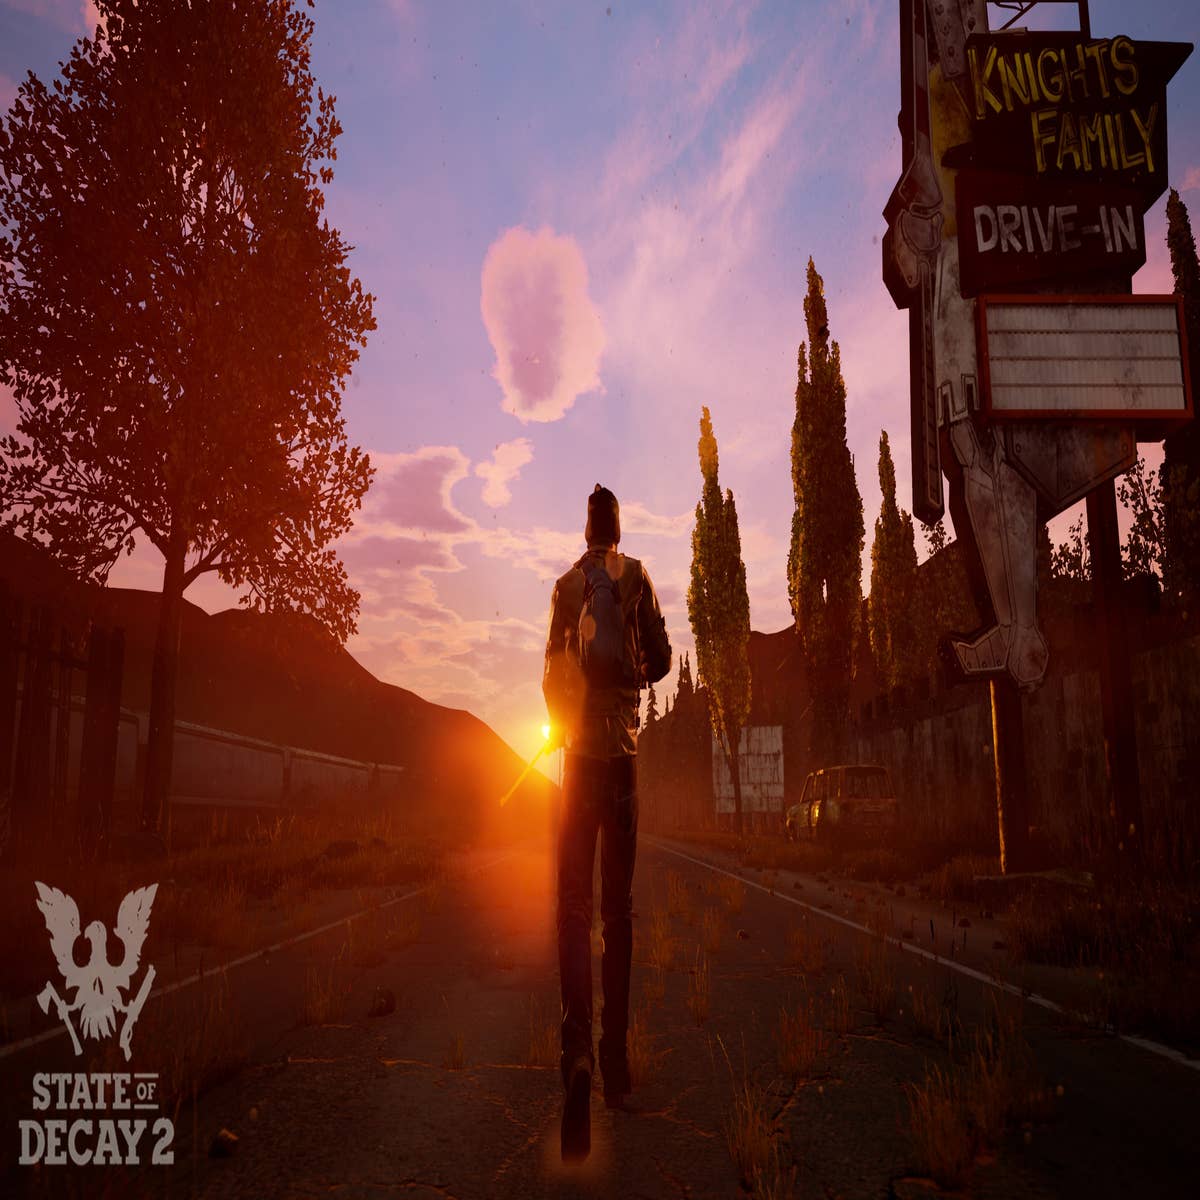 State of Decay 2's free Zedhunter update drops next week